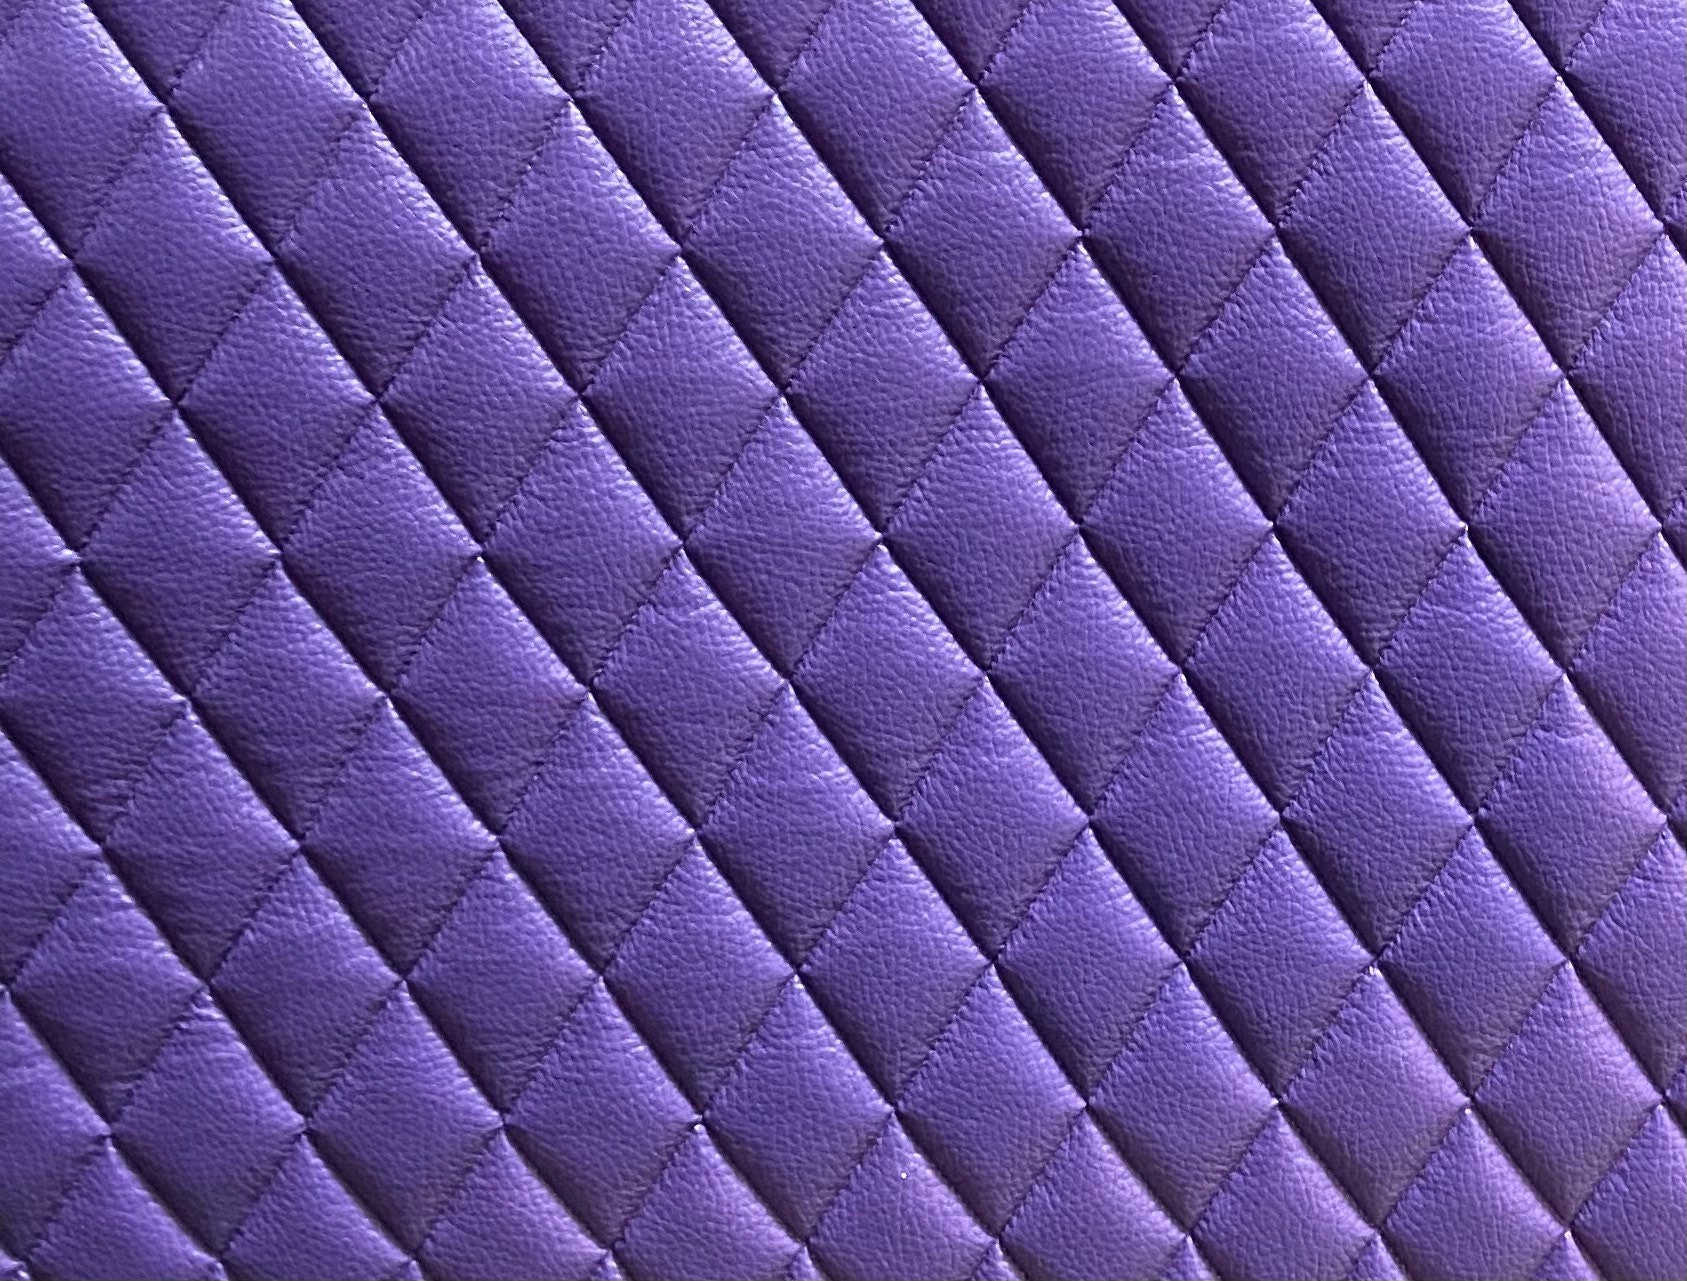 Portbello Smooth Faux Leather Fabric